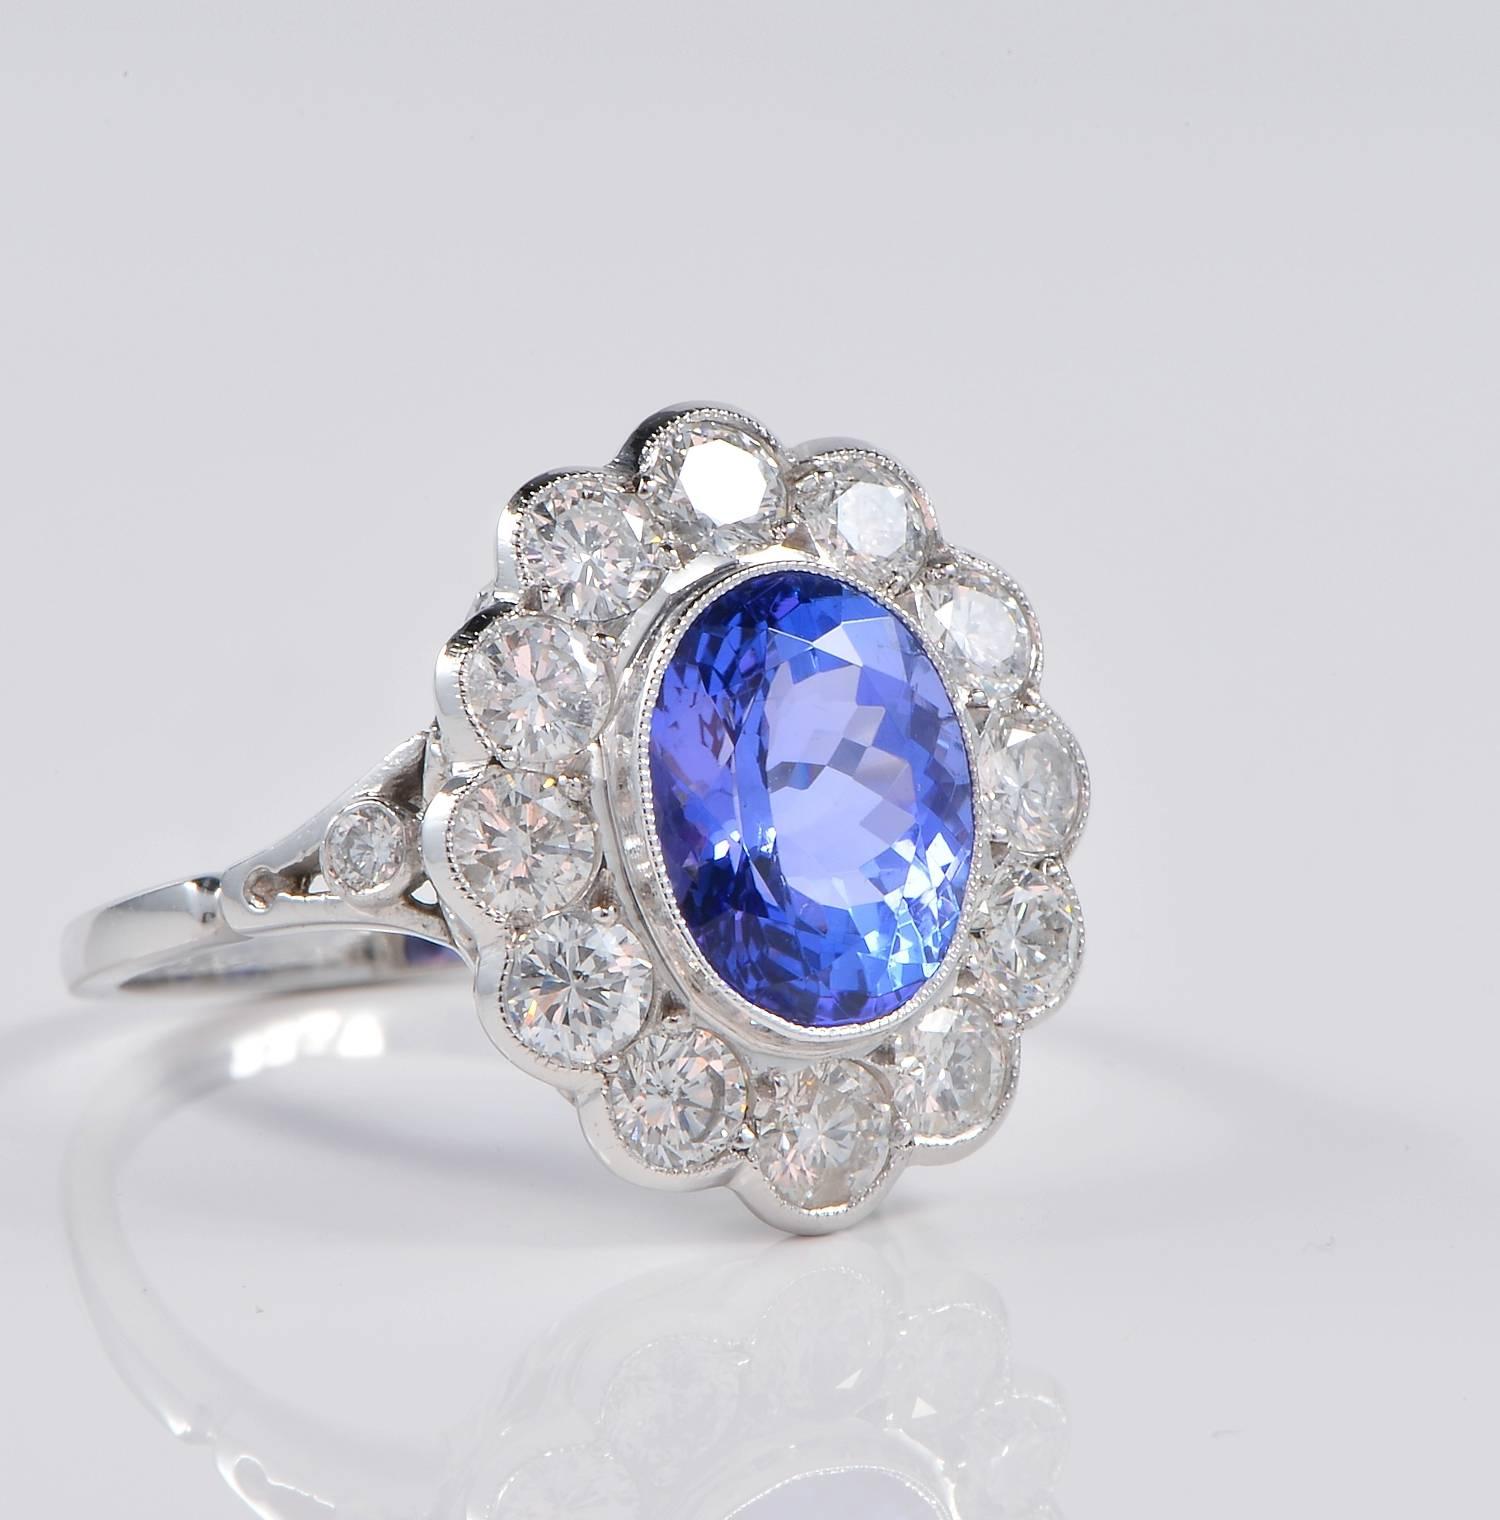 
Superb classy style ring hand crafted mounting of 18 Kt.
Centrally set with a beautiful natural Tanzanite of 3.60 Ct, spectacular blue purple colour.
Surrounding Diamonds content is 2.60 Ct of G VVS/VS round brilliant cut Diamonds of finest